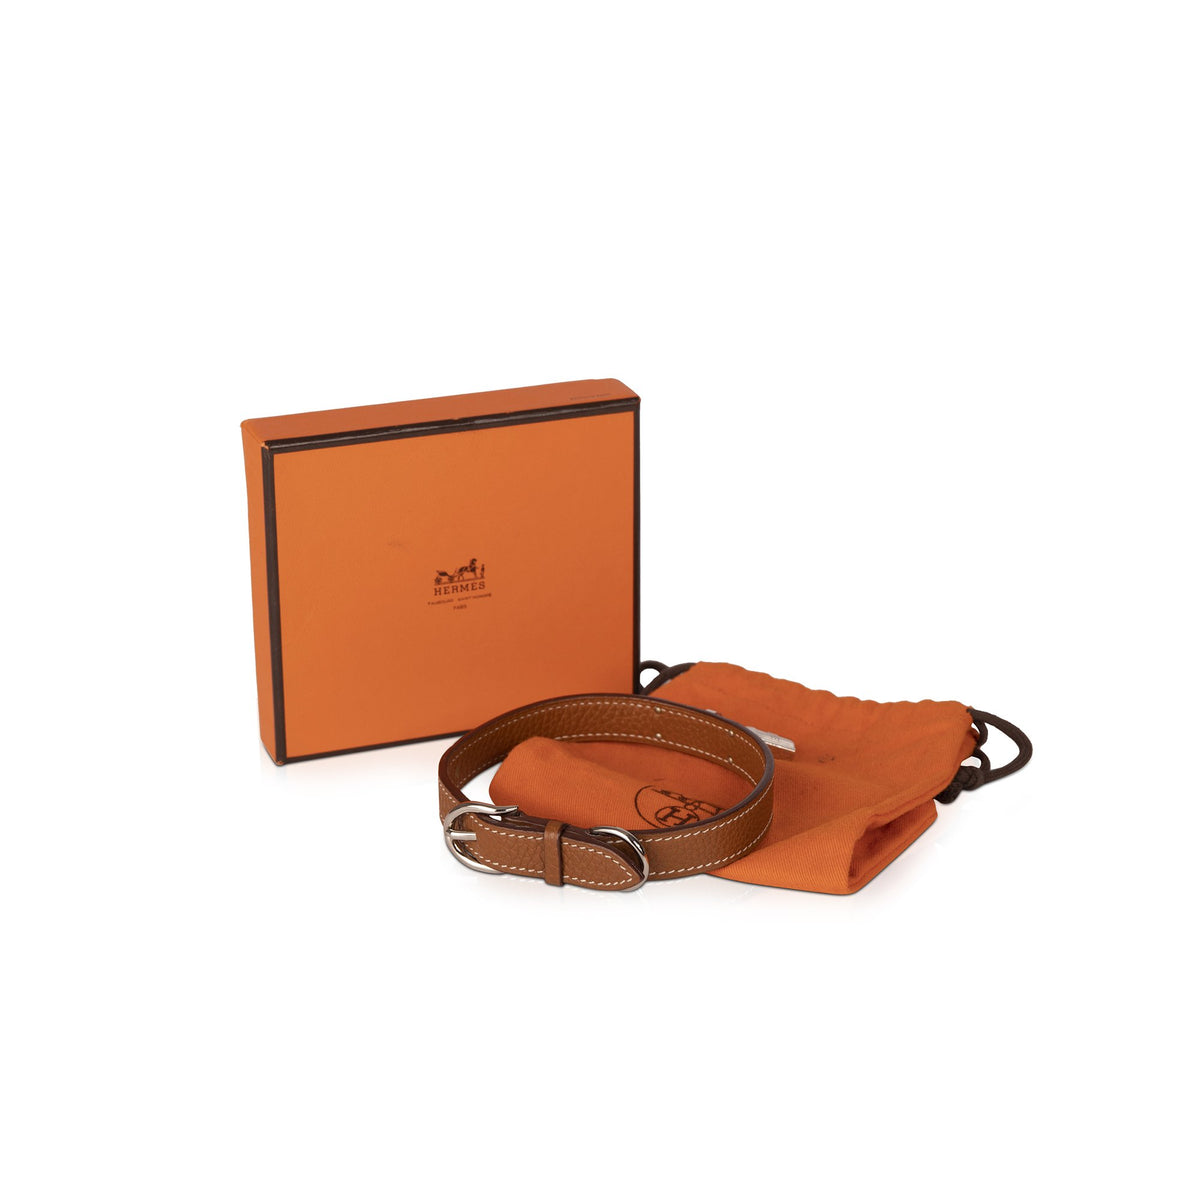 Find the Style at a Price You Can't Beat with Our Collection of Hermes  Epsom Leather Kelly Dog Collar w/ Box Hermes